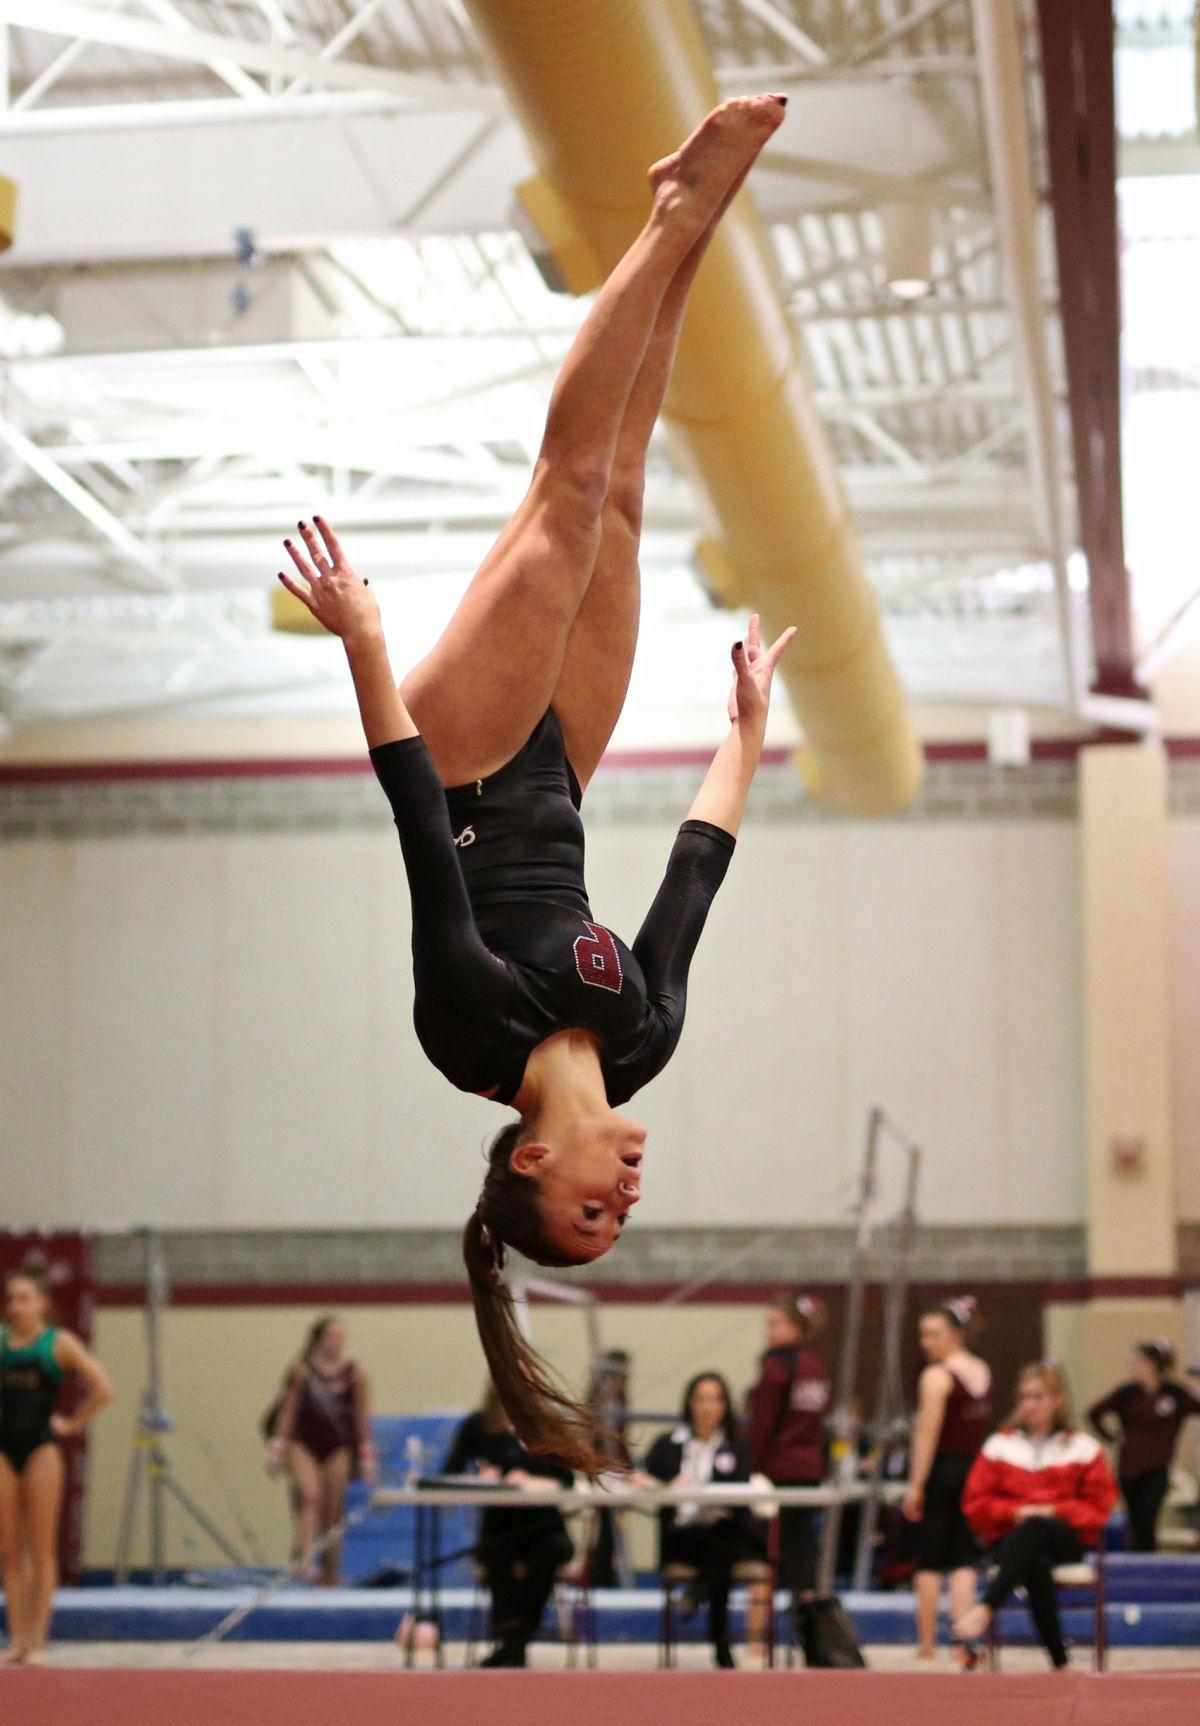 North wins second consecutive gymnastics crown | Independents | www.waterandnature.org